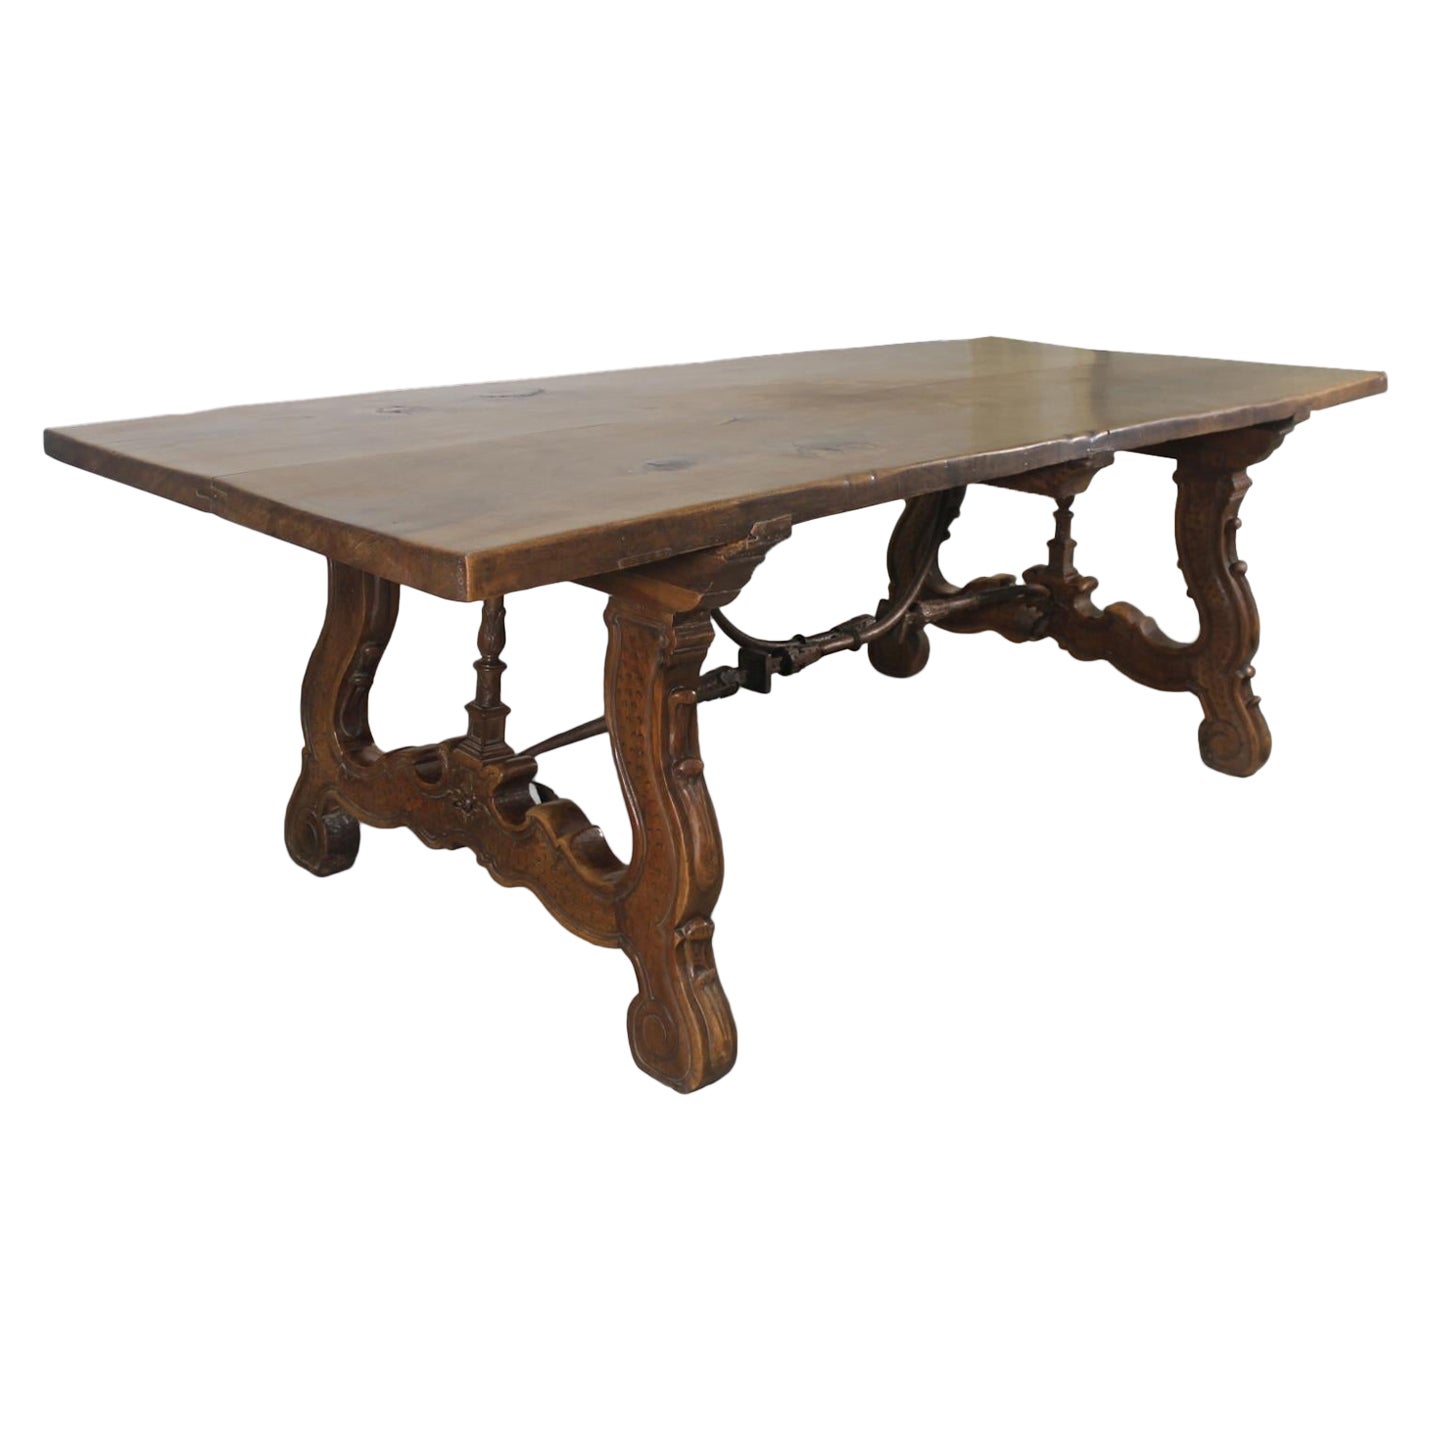 Spanish Friar Table in “Liria” style made of Olive tree wood & Iron, s. XVIII For Sale